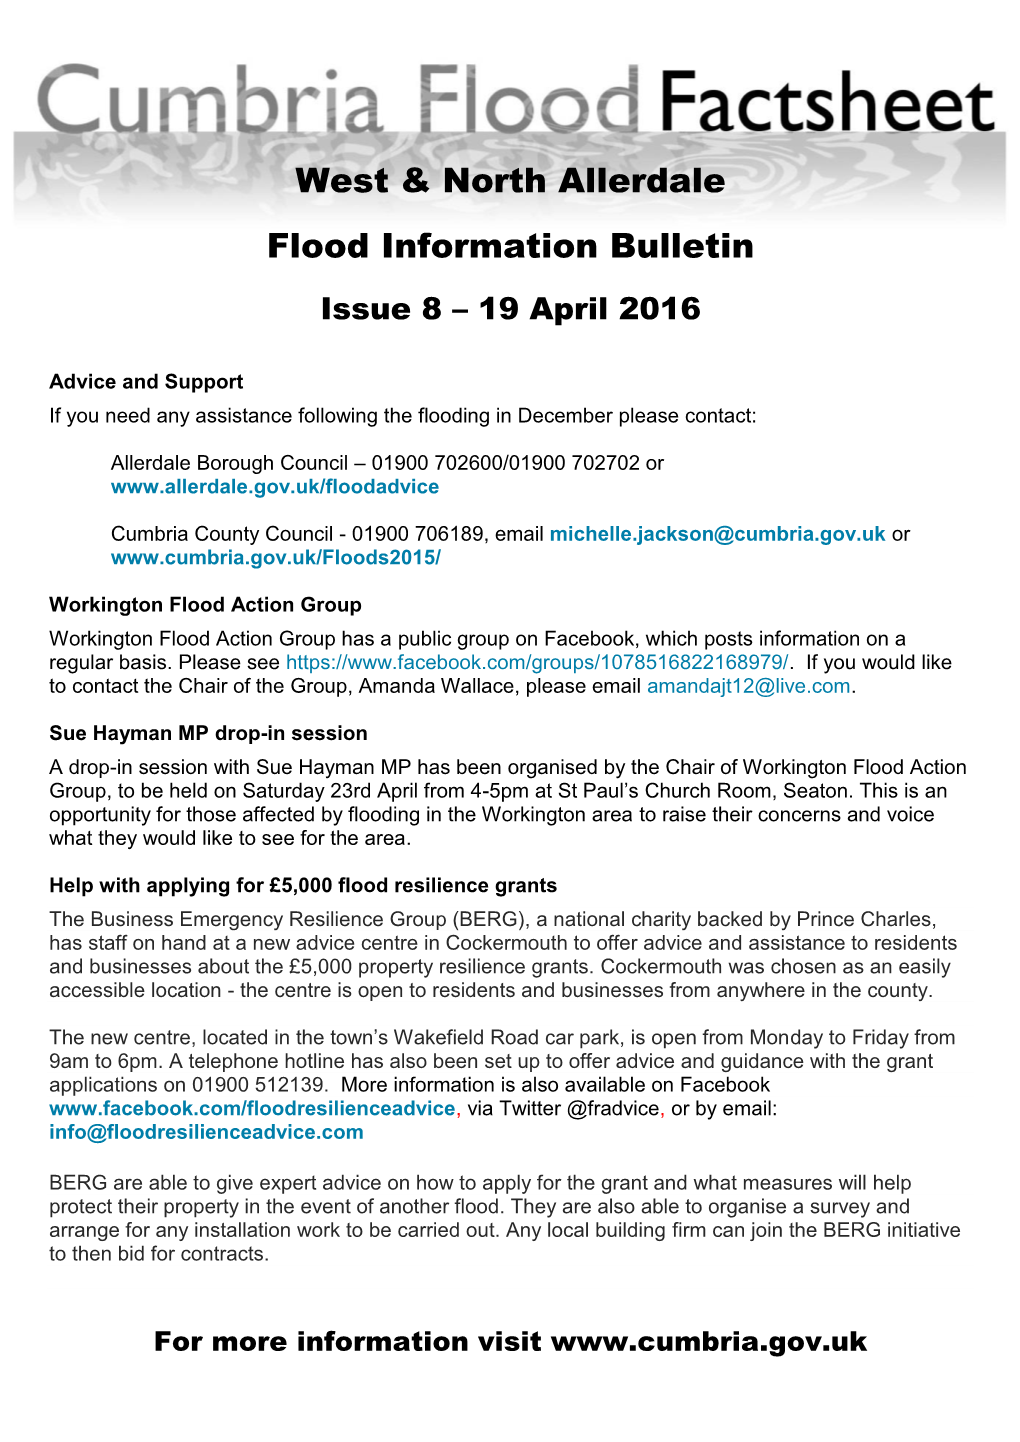 West and North Allerdale Flood Information Bulletin 190416